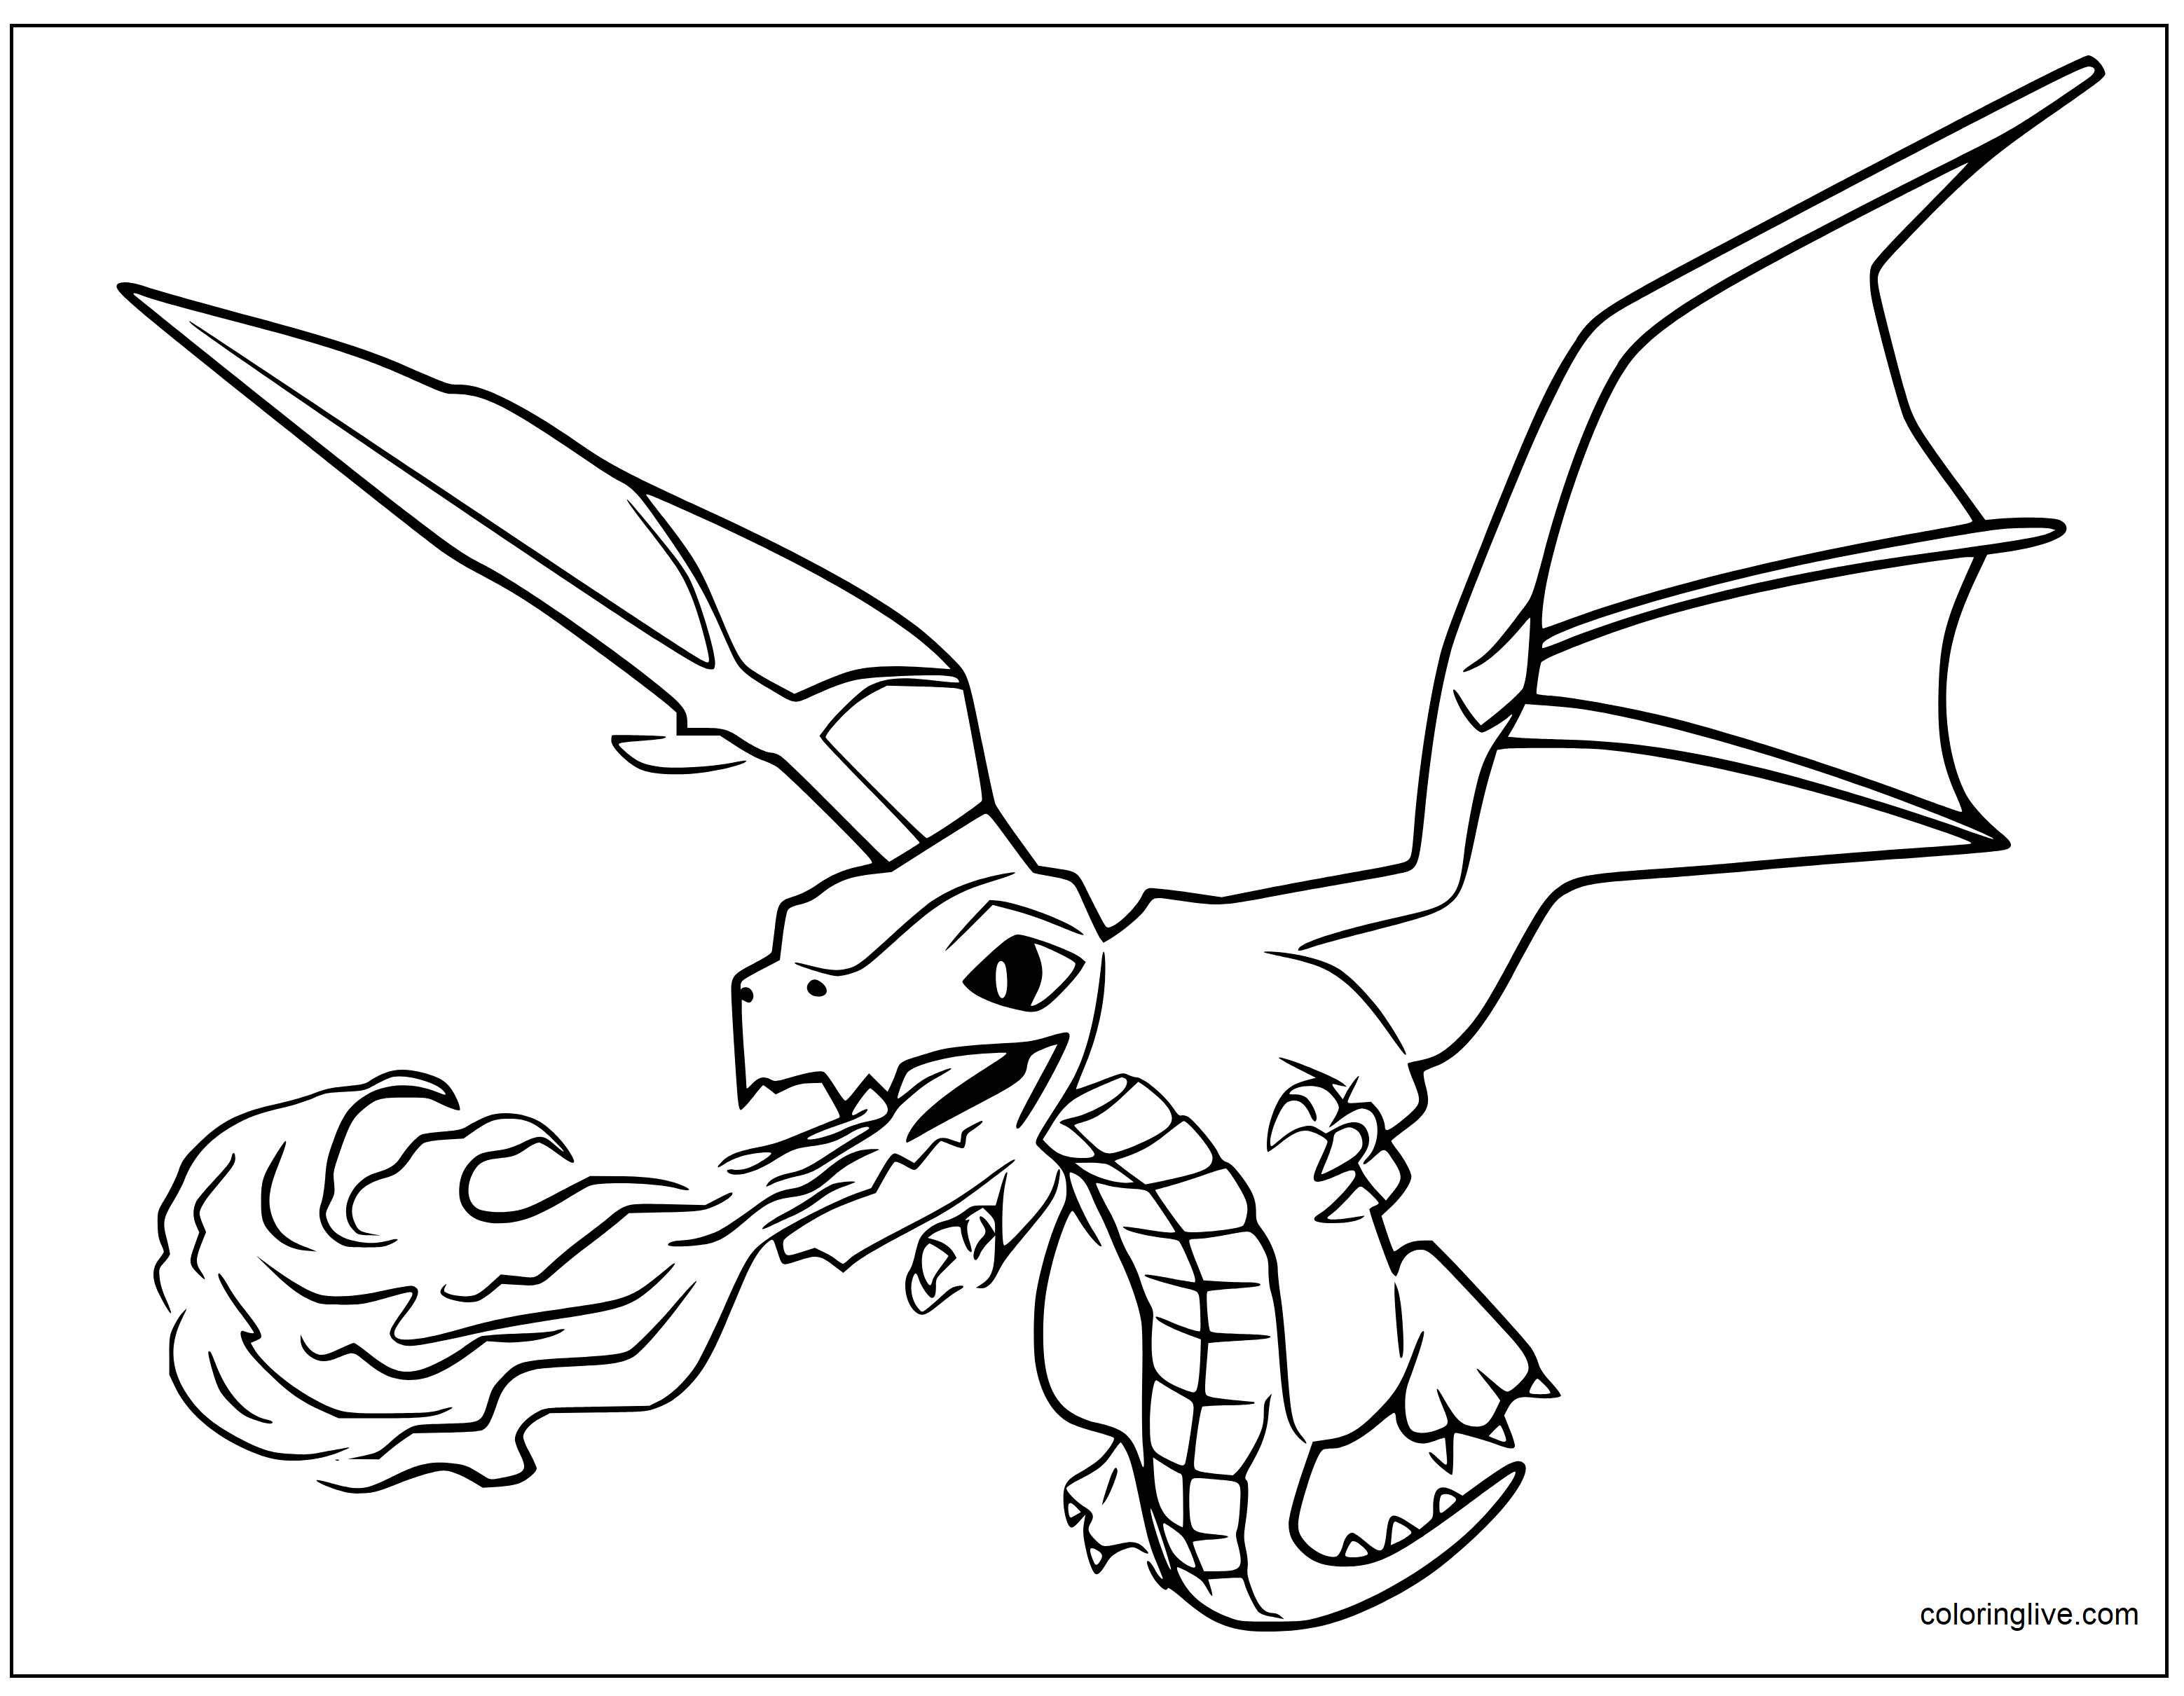 Printable Dragon spitting fire Coloring Page for kids.